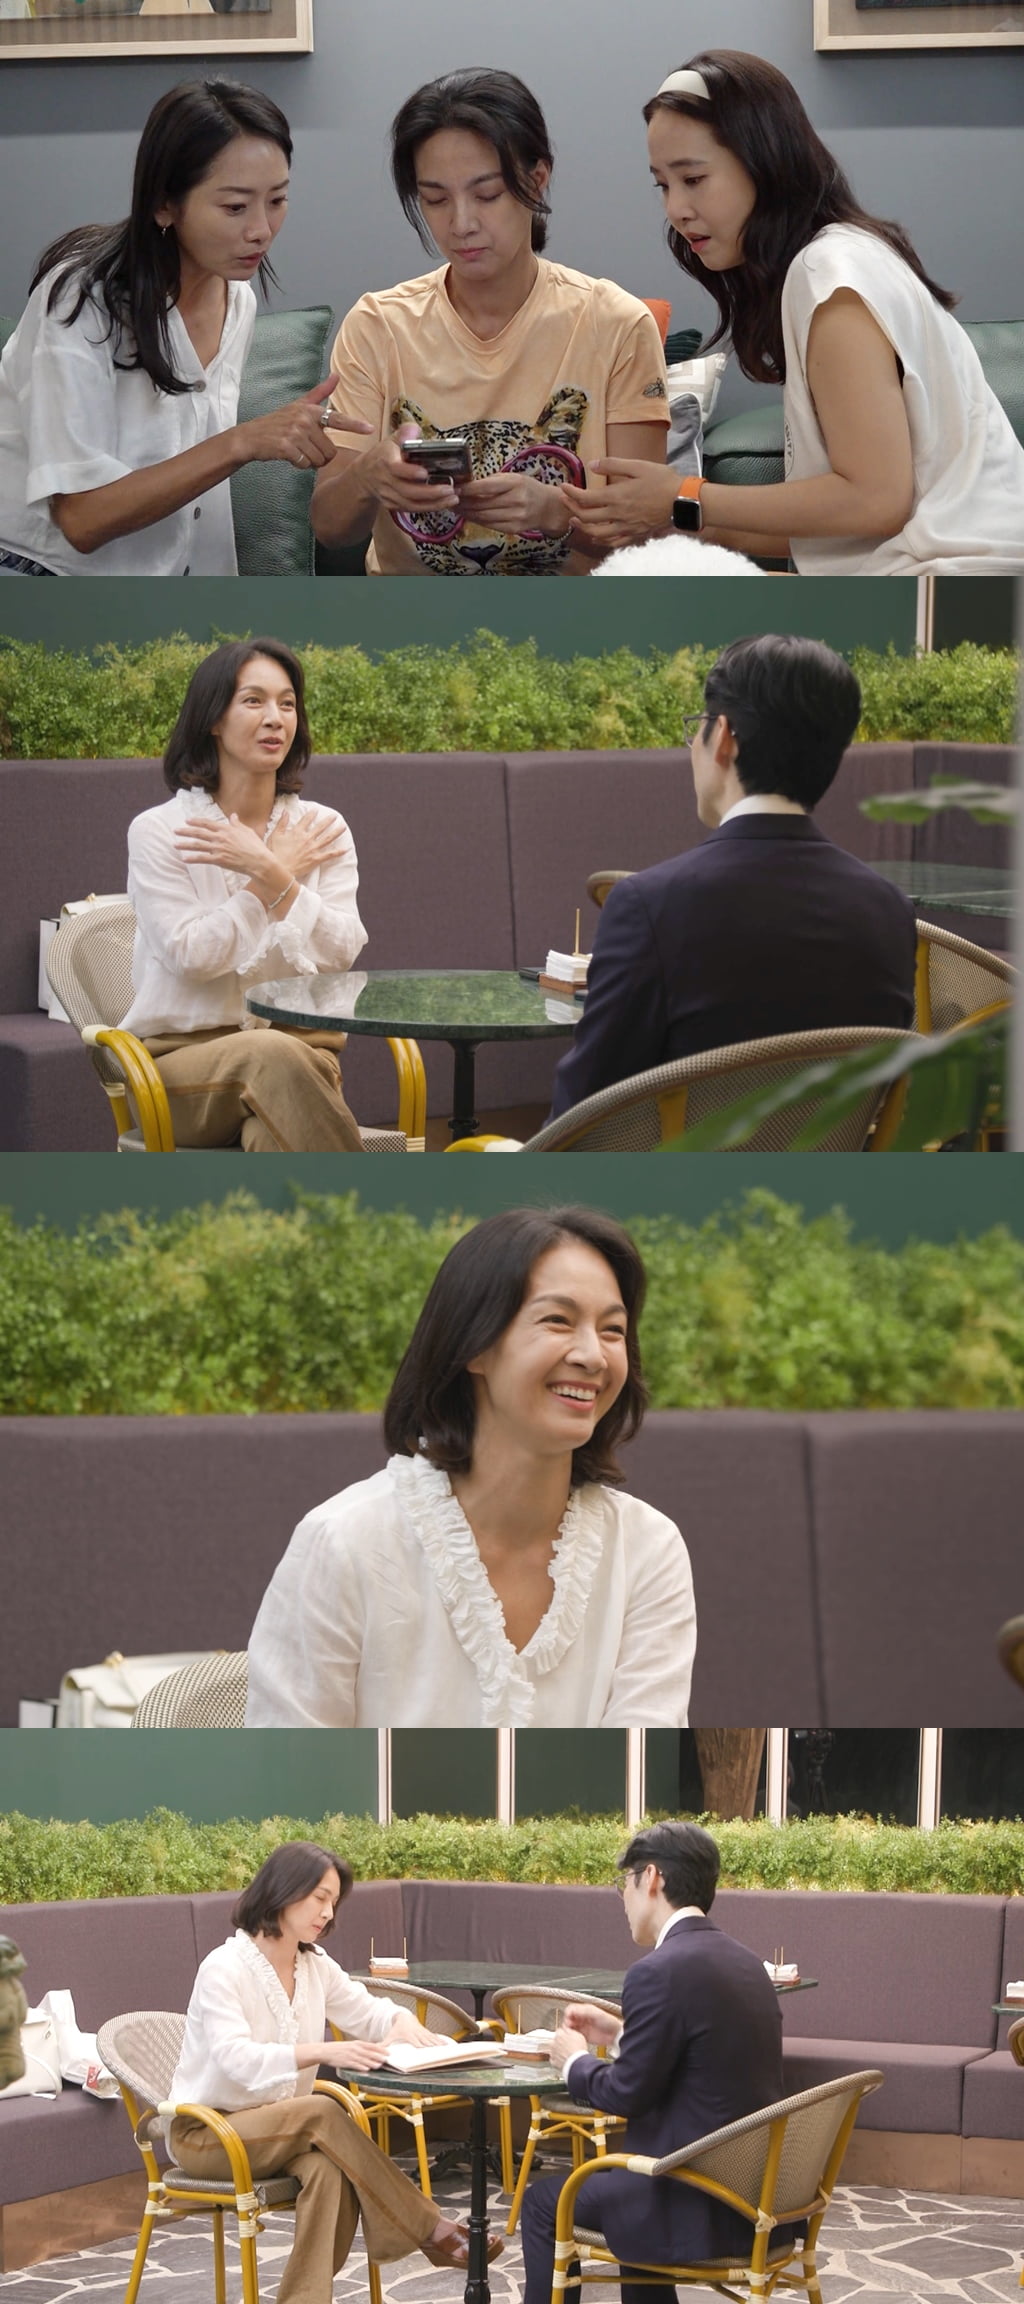 Actress Park Sun-young had a blind date with a younger lawyer after 30 years